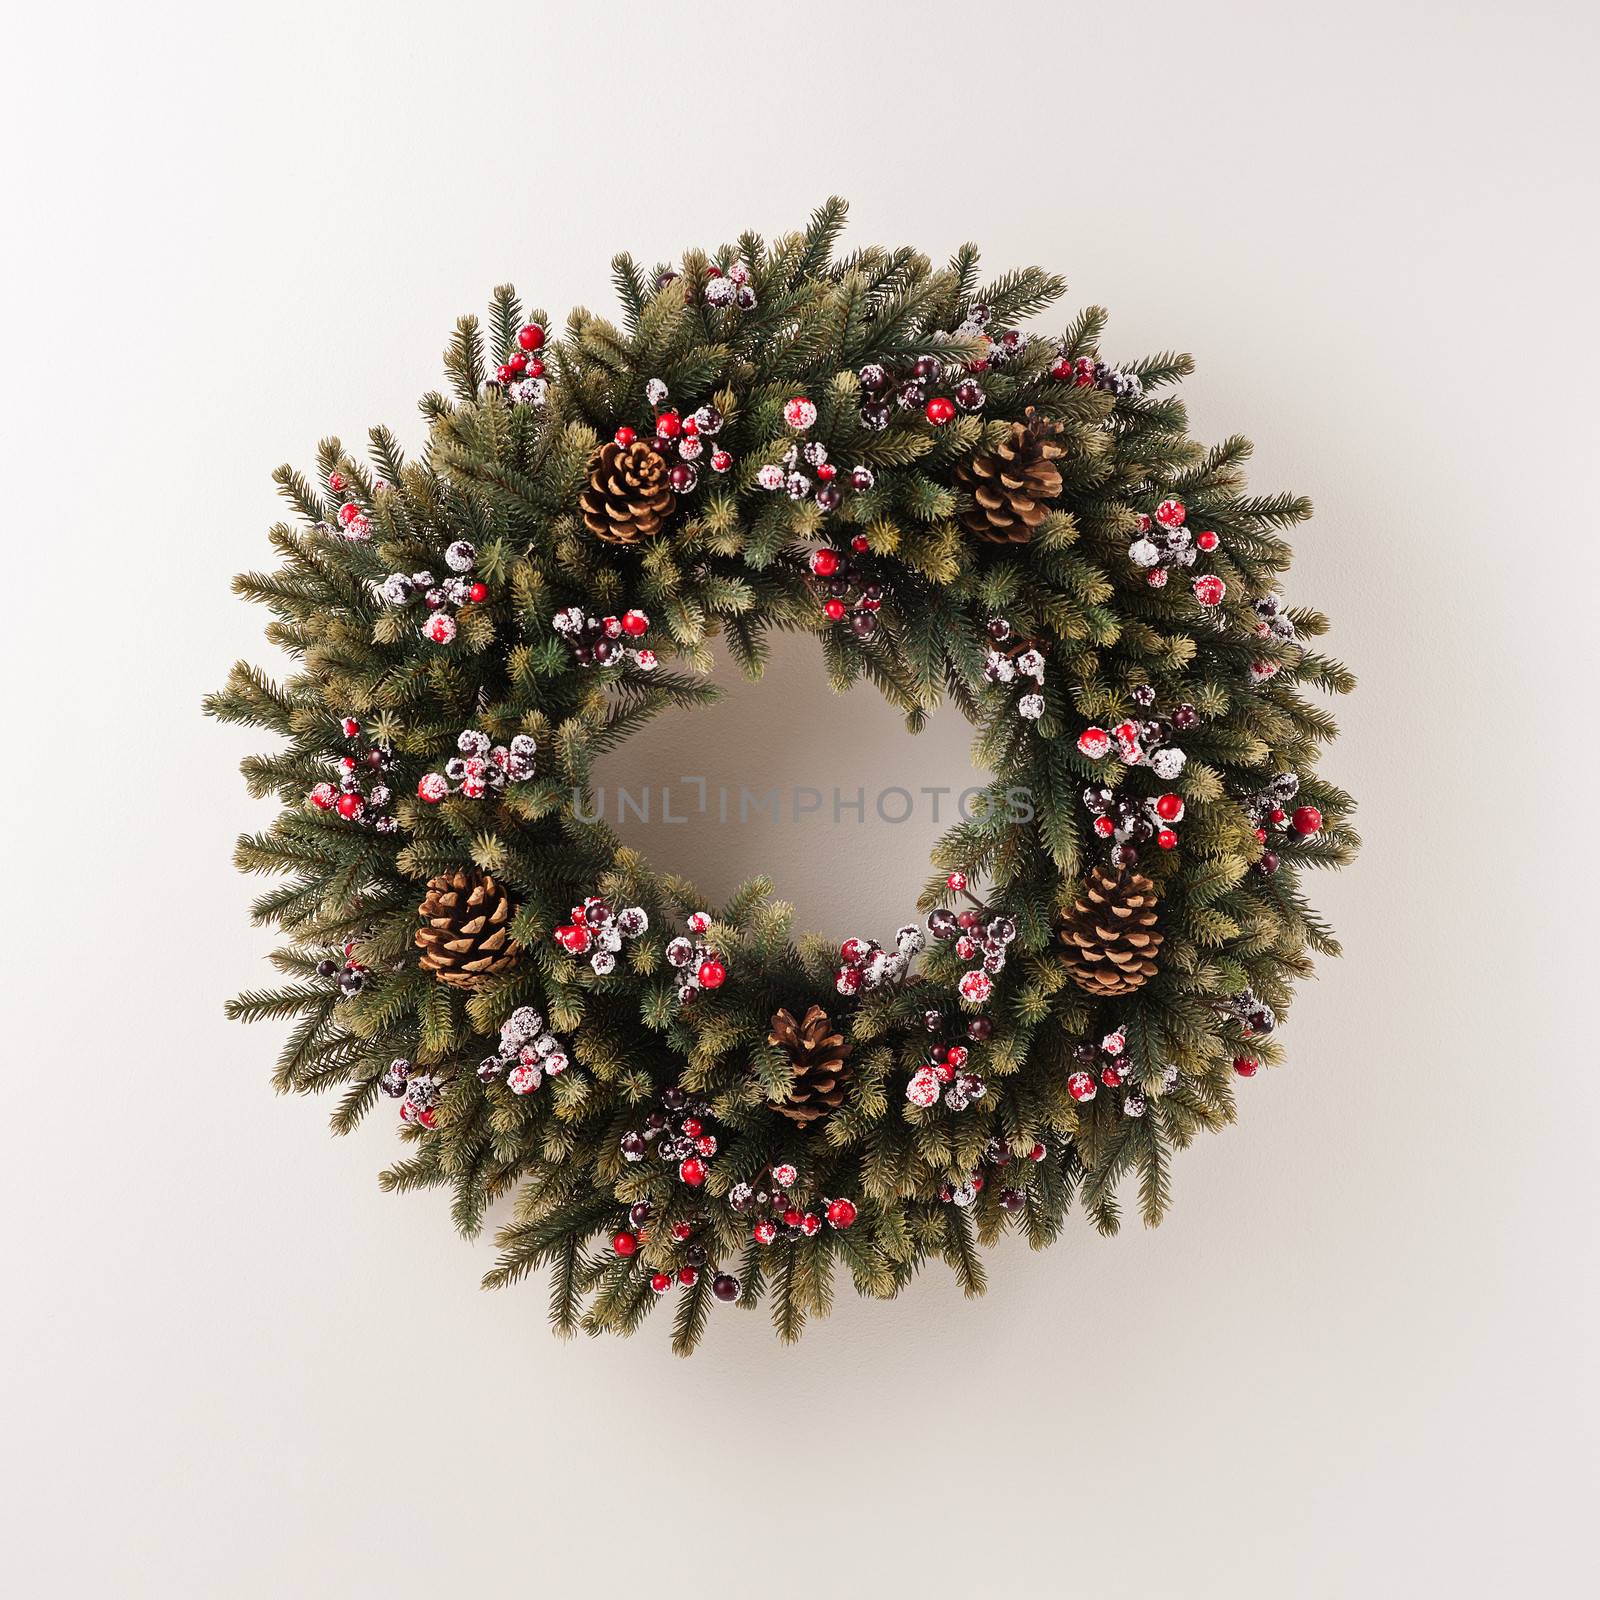 Advent Christmas wreath for door decoration over white